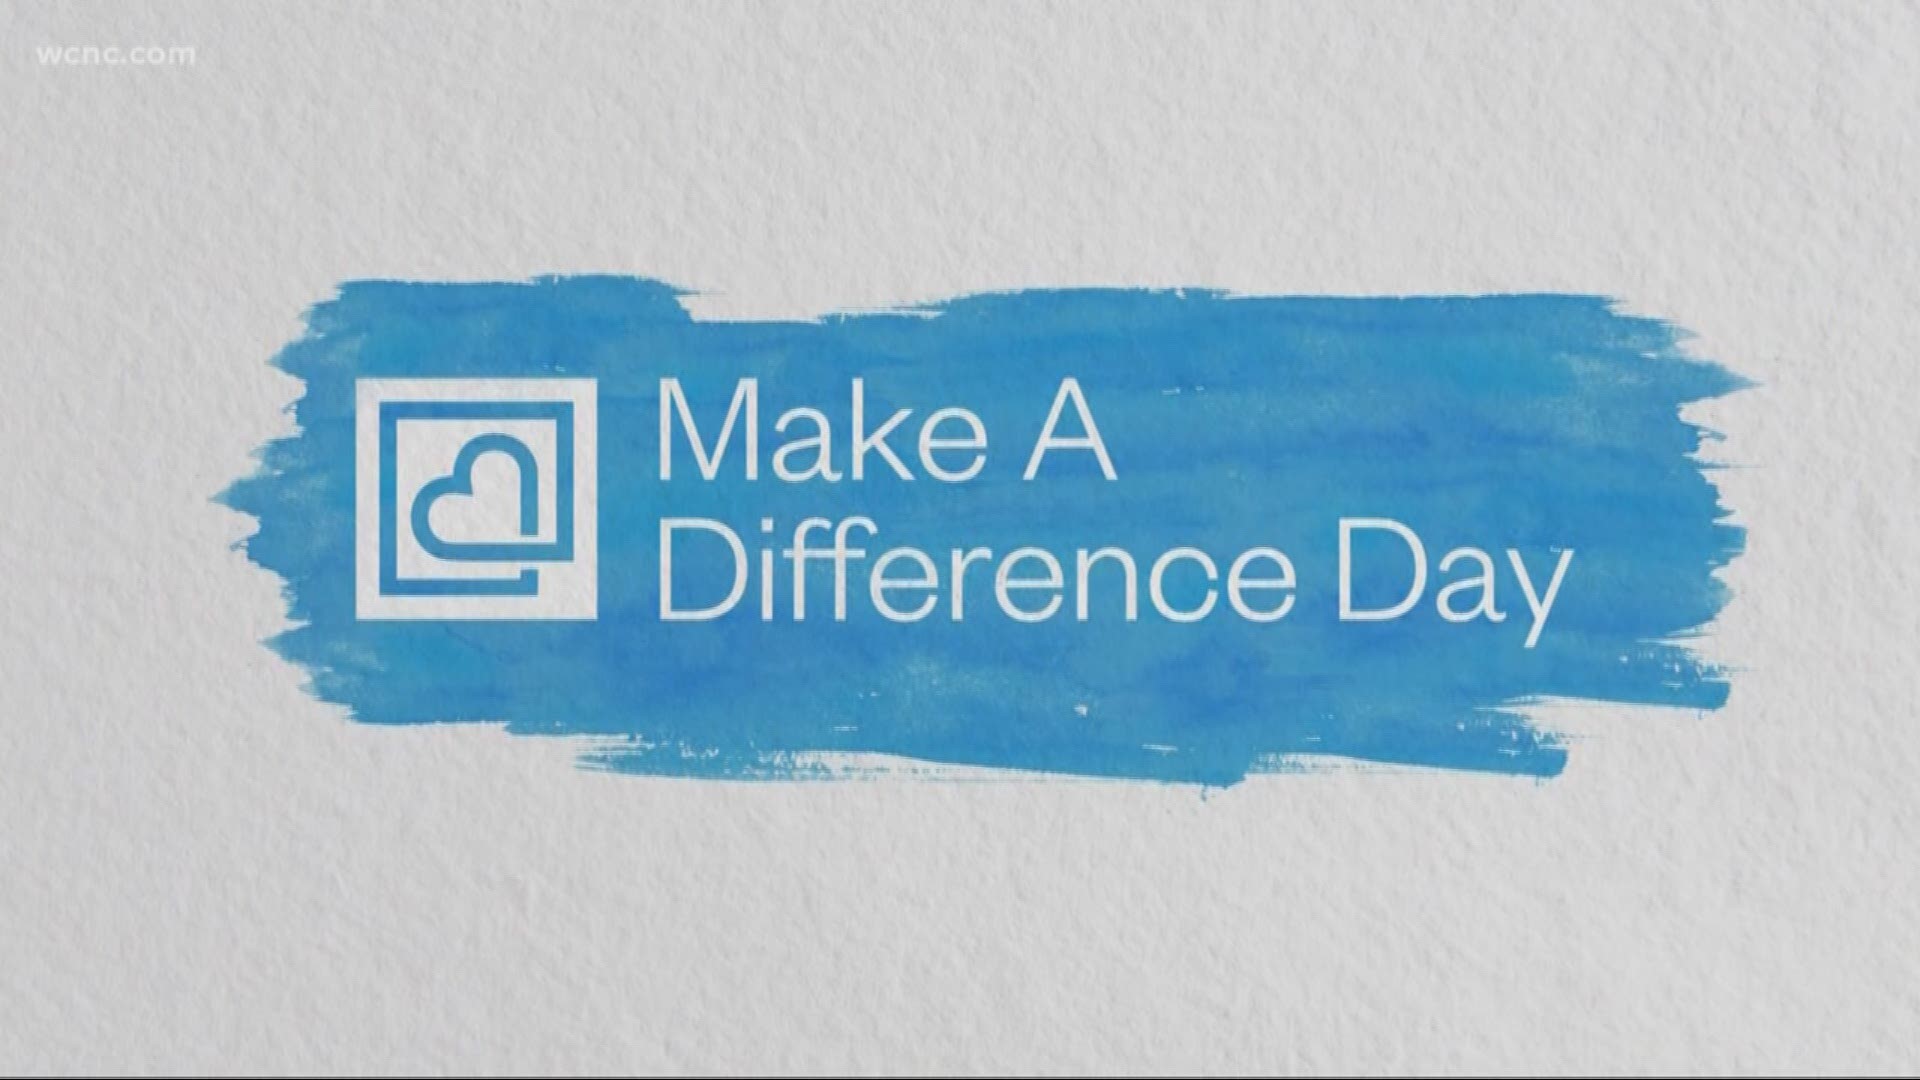 On Saturday, NBC Charlotte took part in a nationwide day of service called, Make A Difference Day.